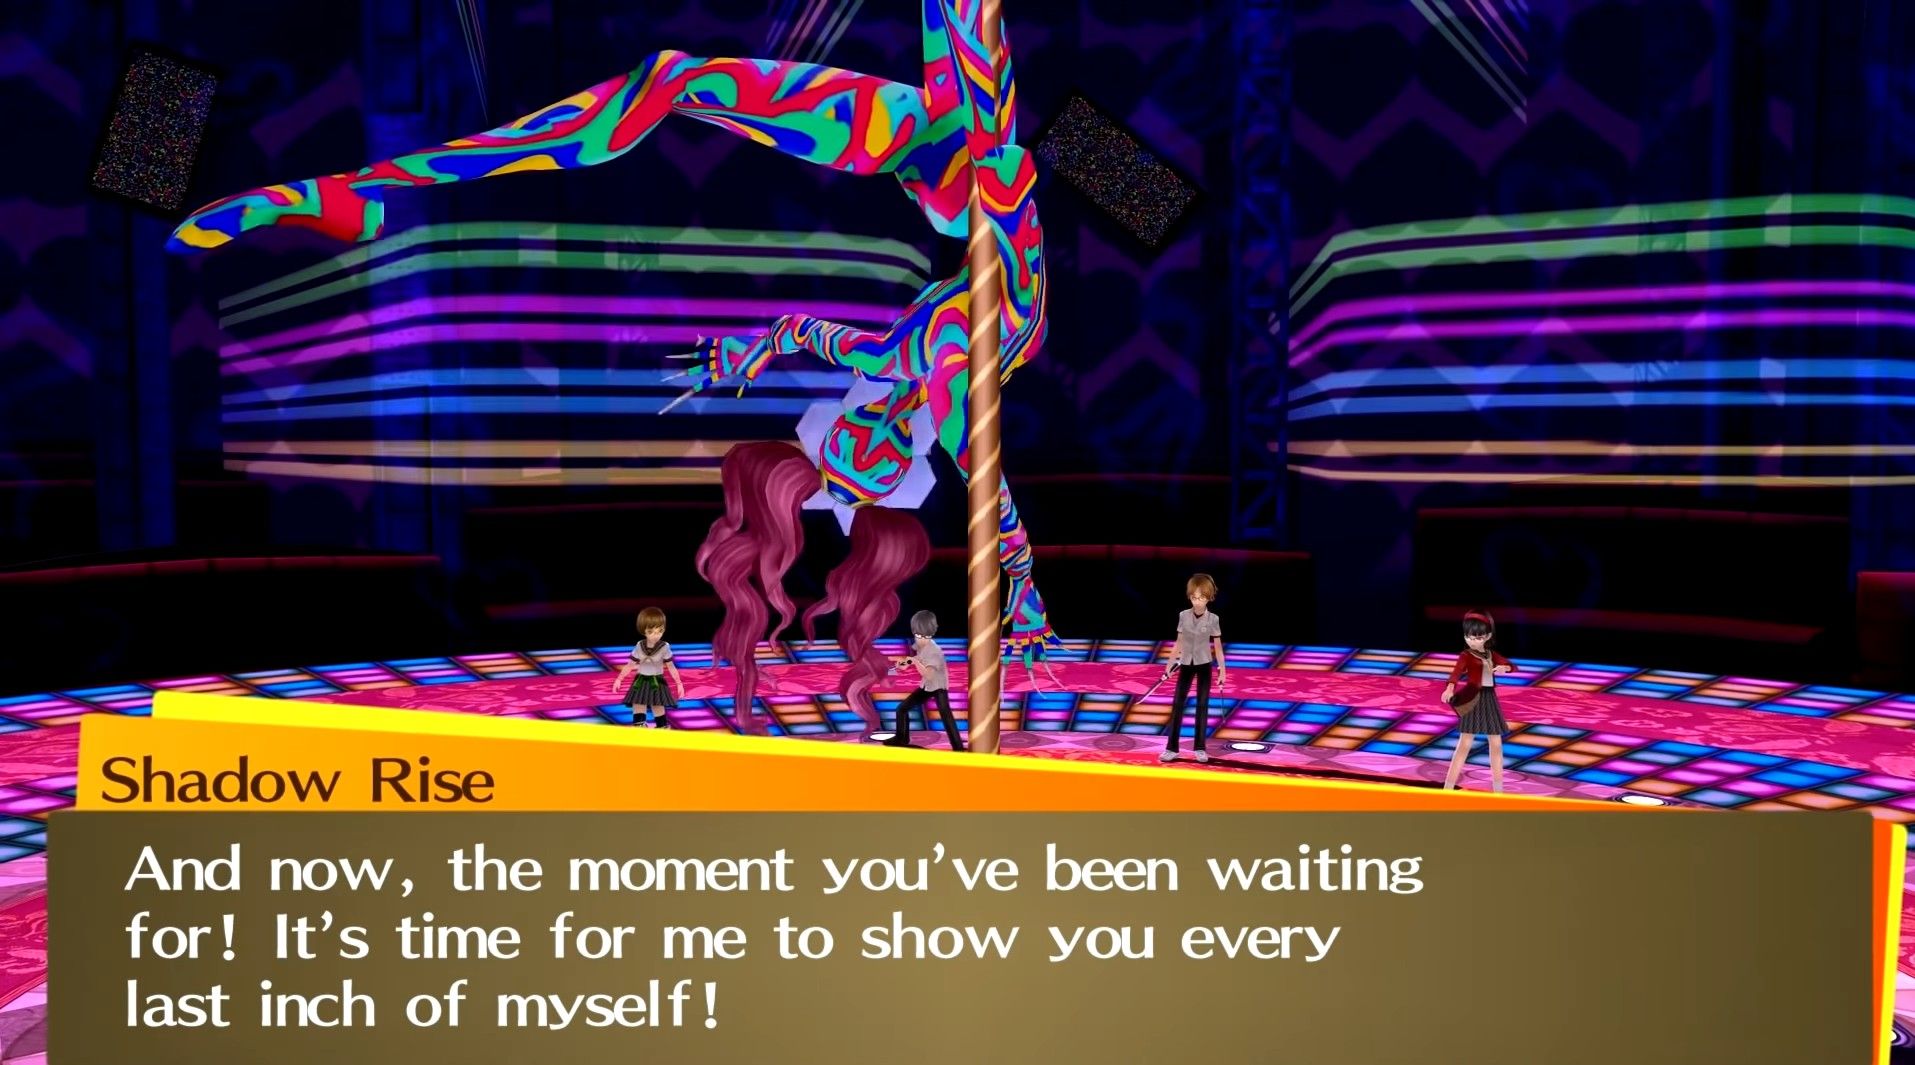 shadow rise speaking in innuendo during the rise's shadow boss fight in persona 4 golden